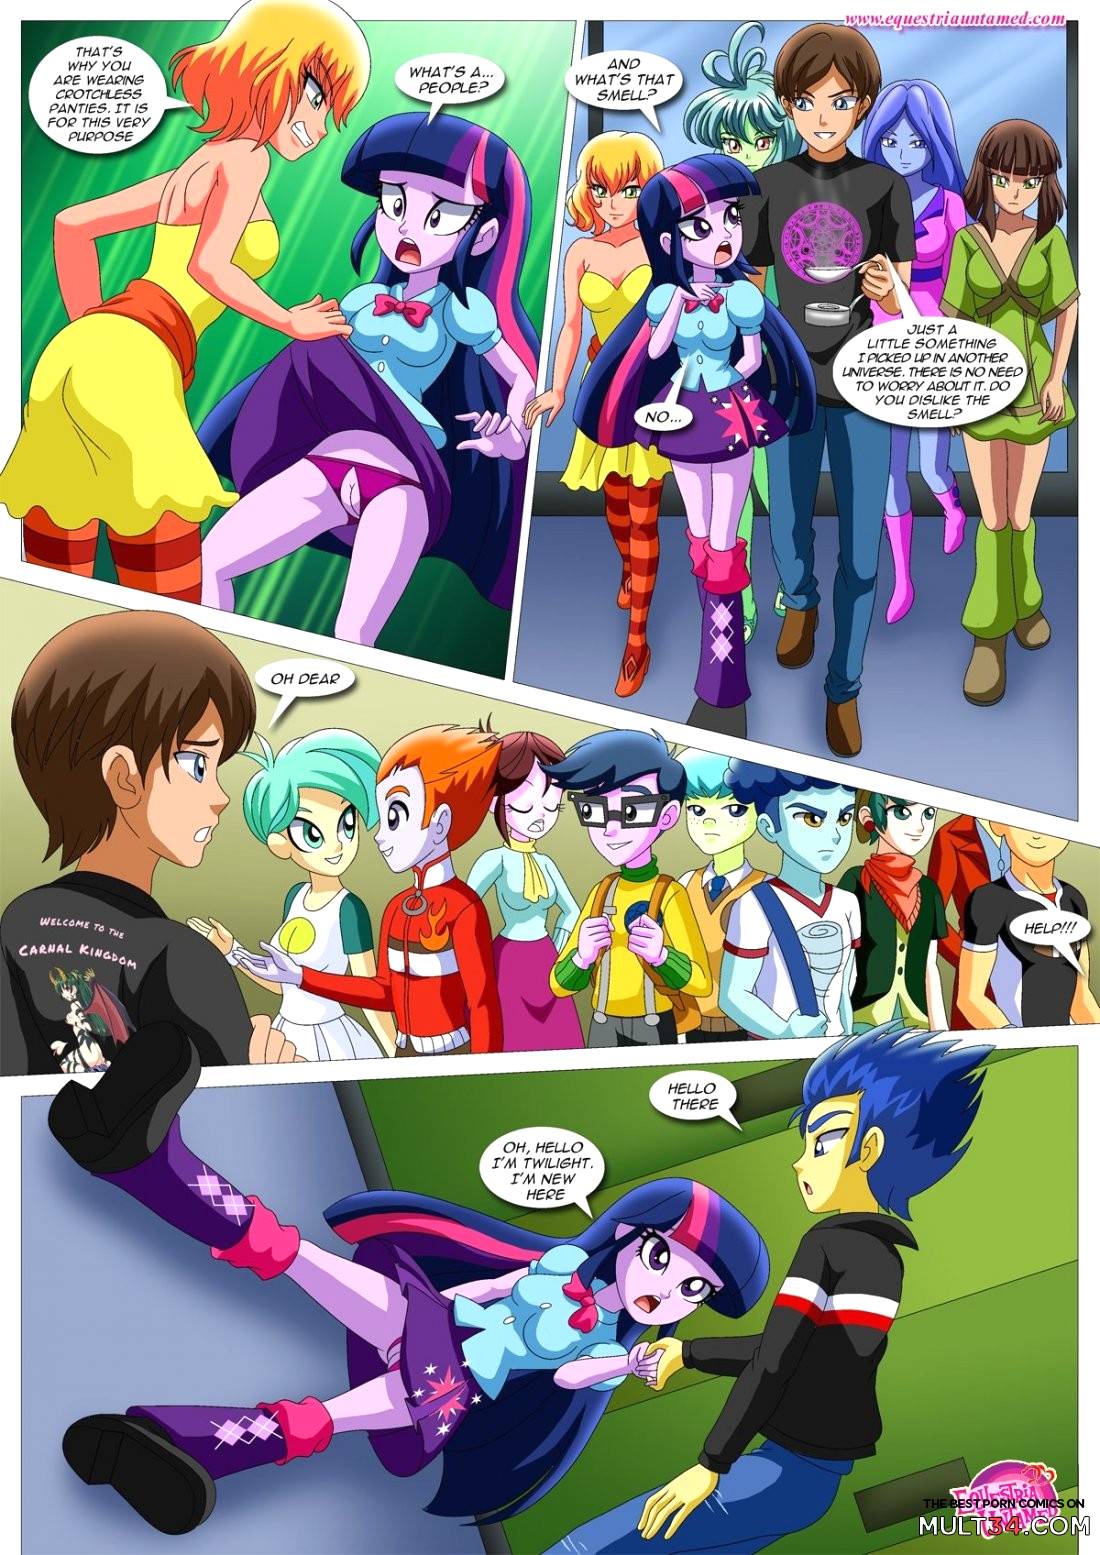 Equestria girls unleashed page 3